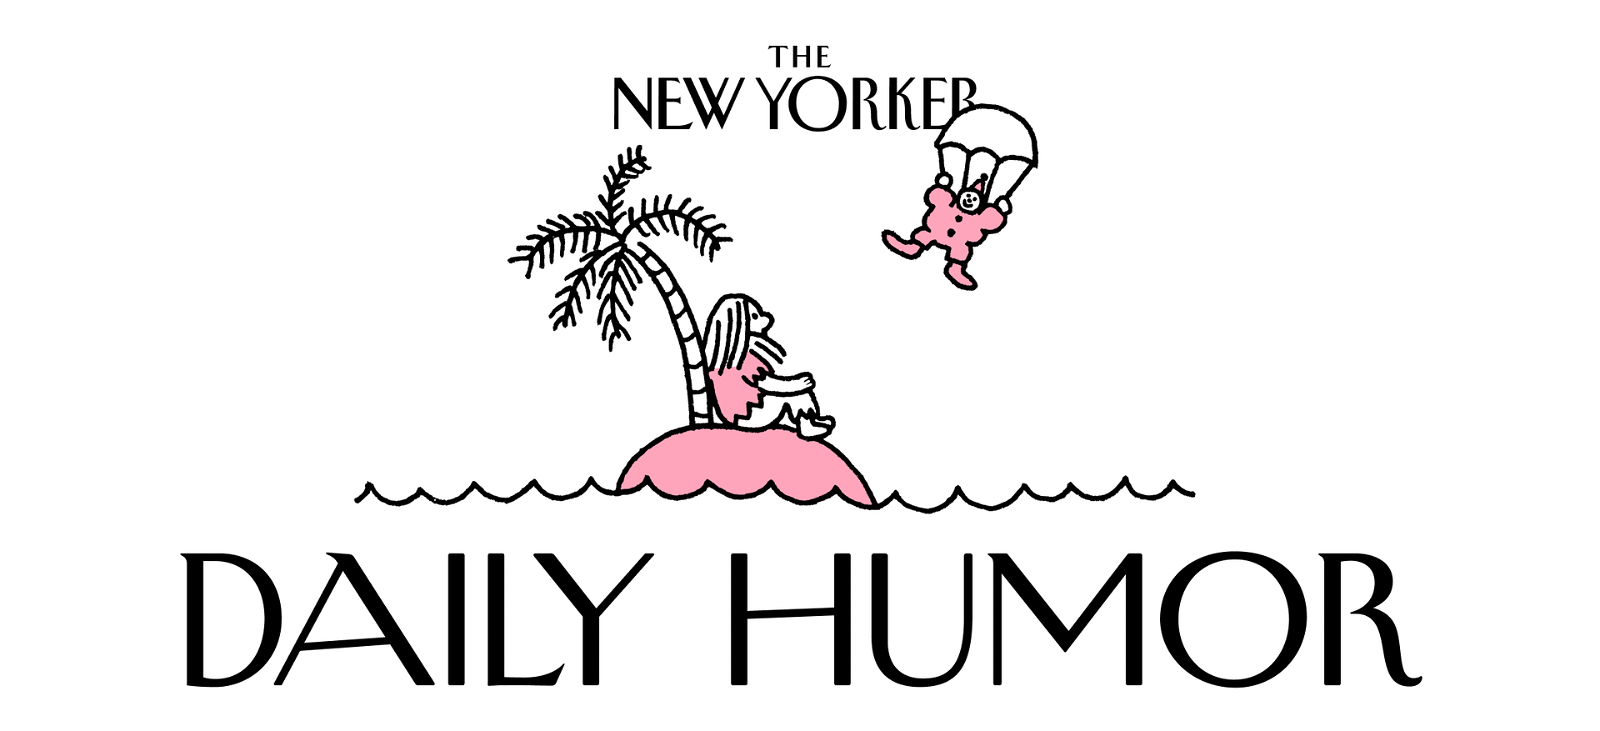 The New Yorker Daily Humor